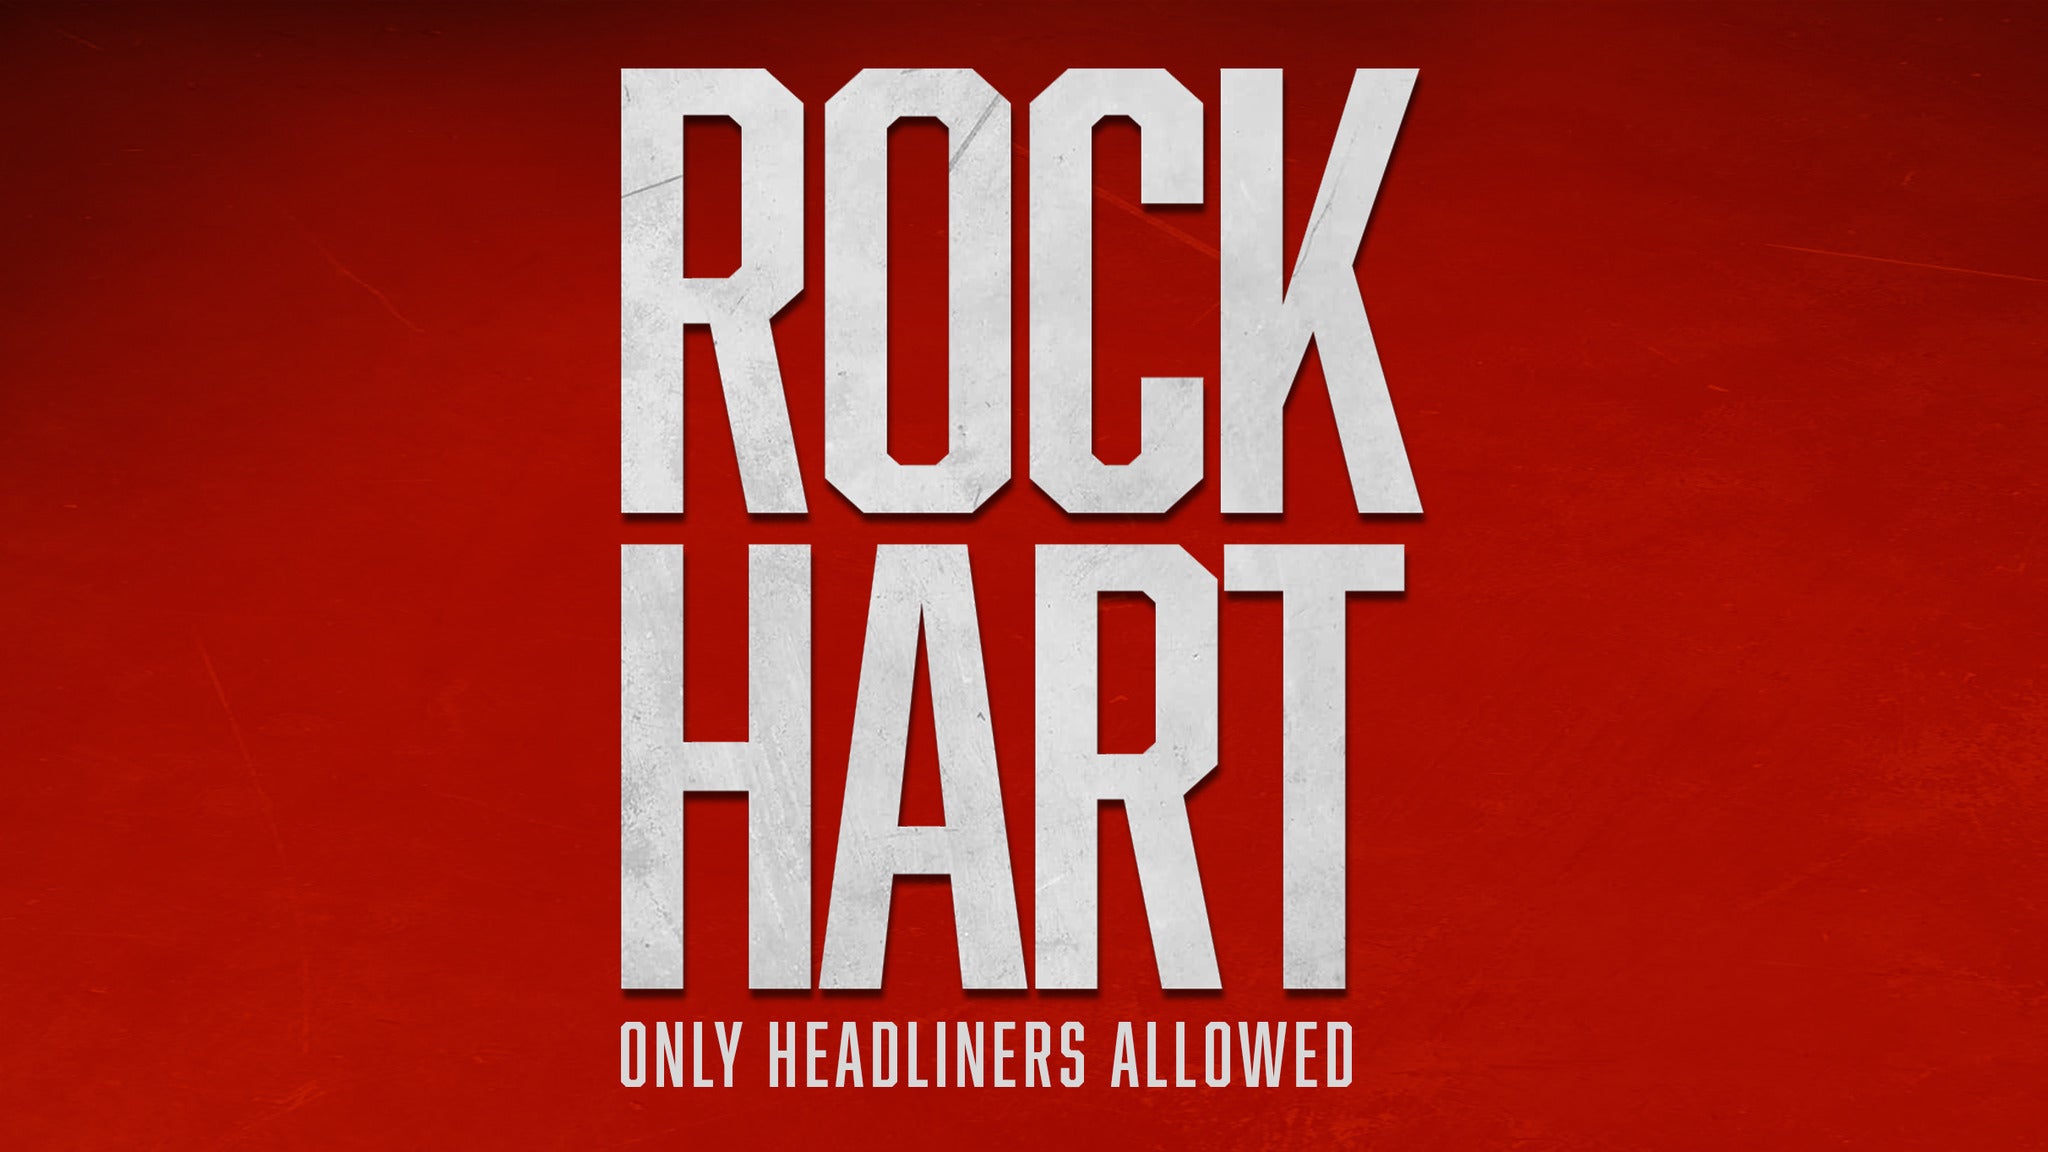 Rock Hart: Only Headliners Allowed in Newark promo photo for Live Nation presale offer code